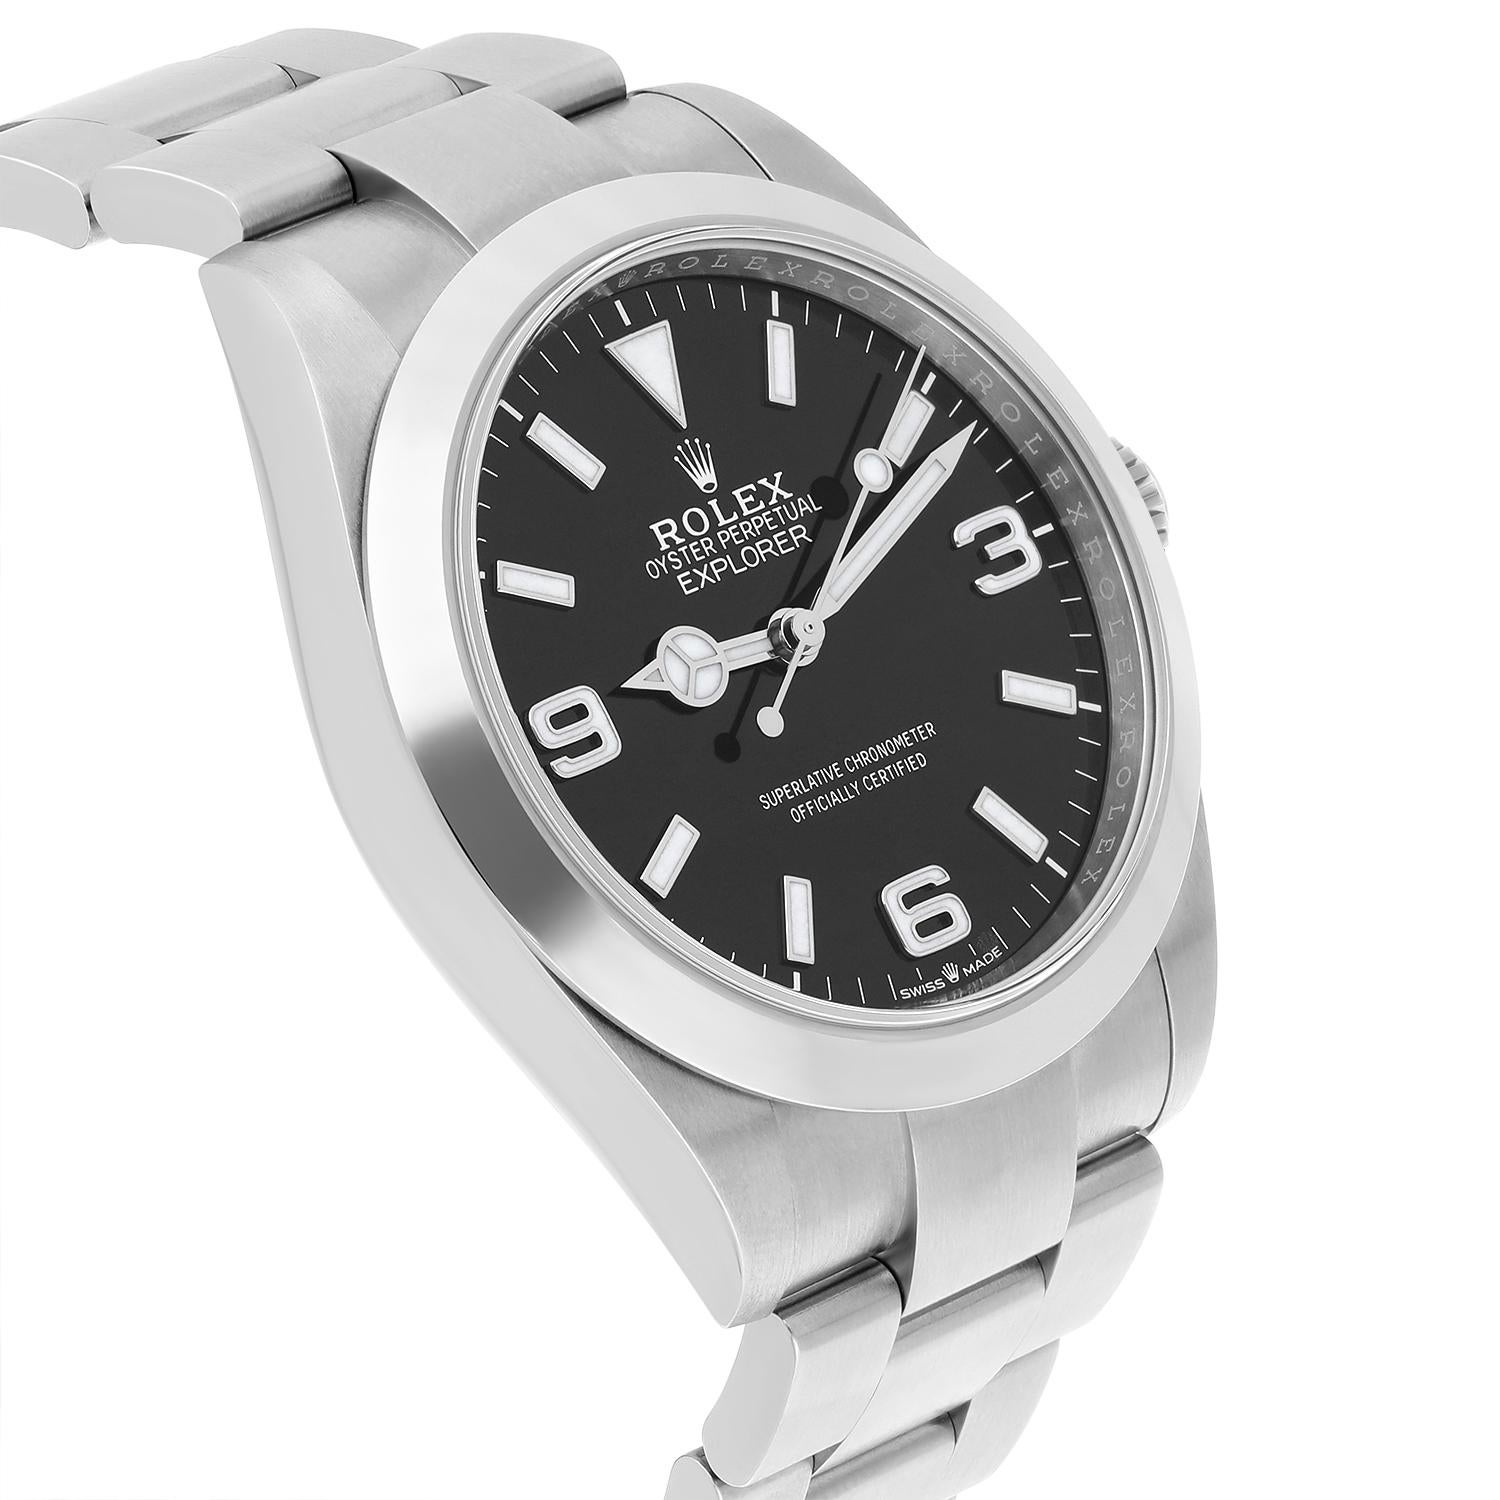 Rolex Explorer Automatic Chronometer Black Dial Men's Watch 224270 Unworn In New Condition For Sale In New York, NY